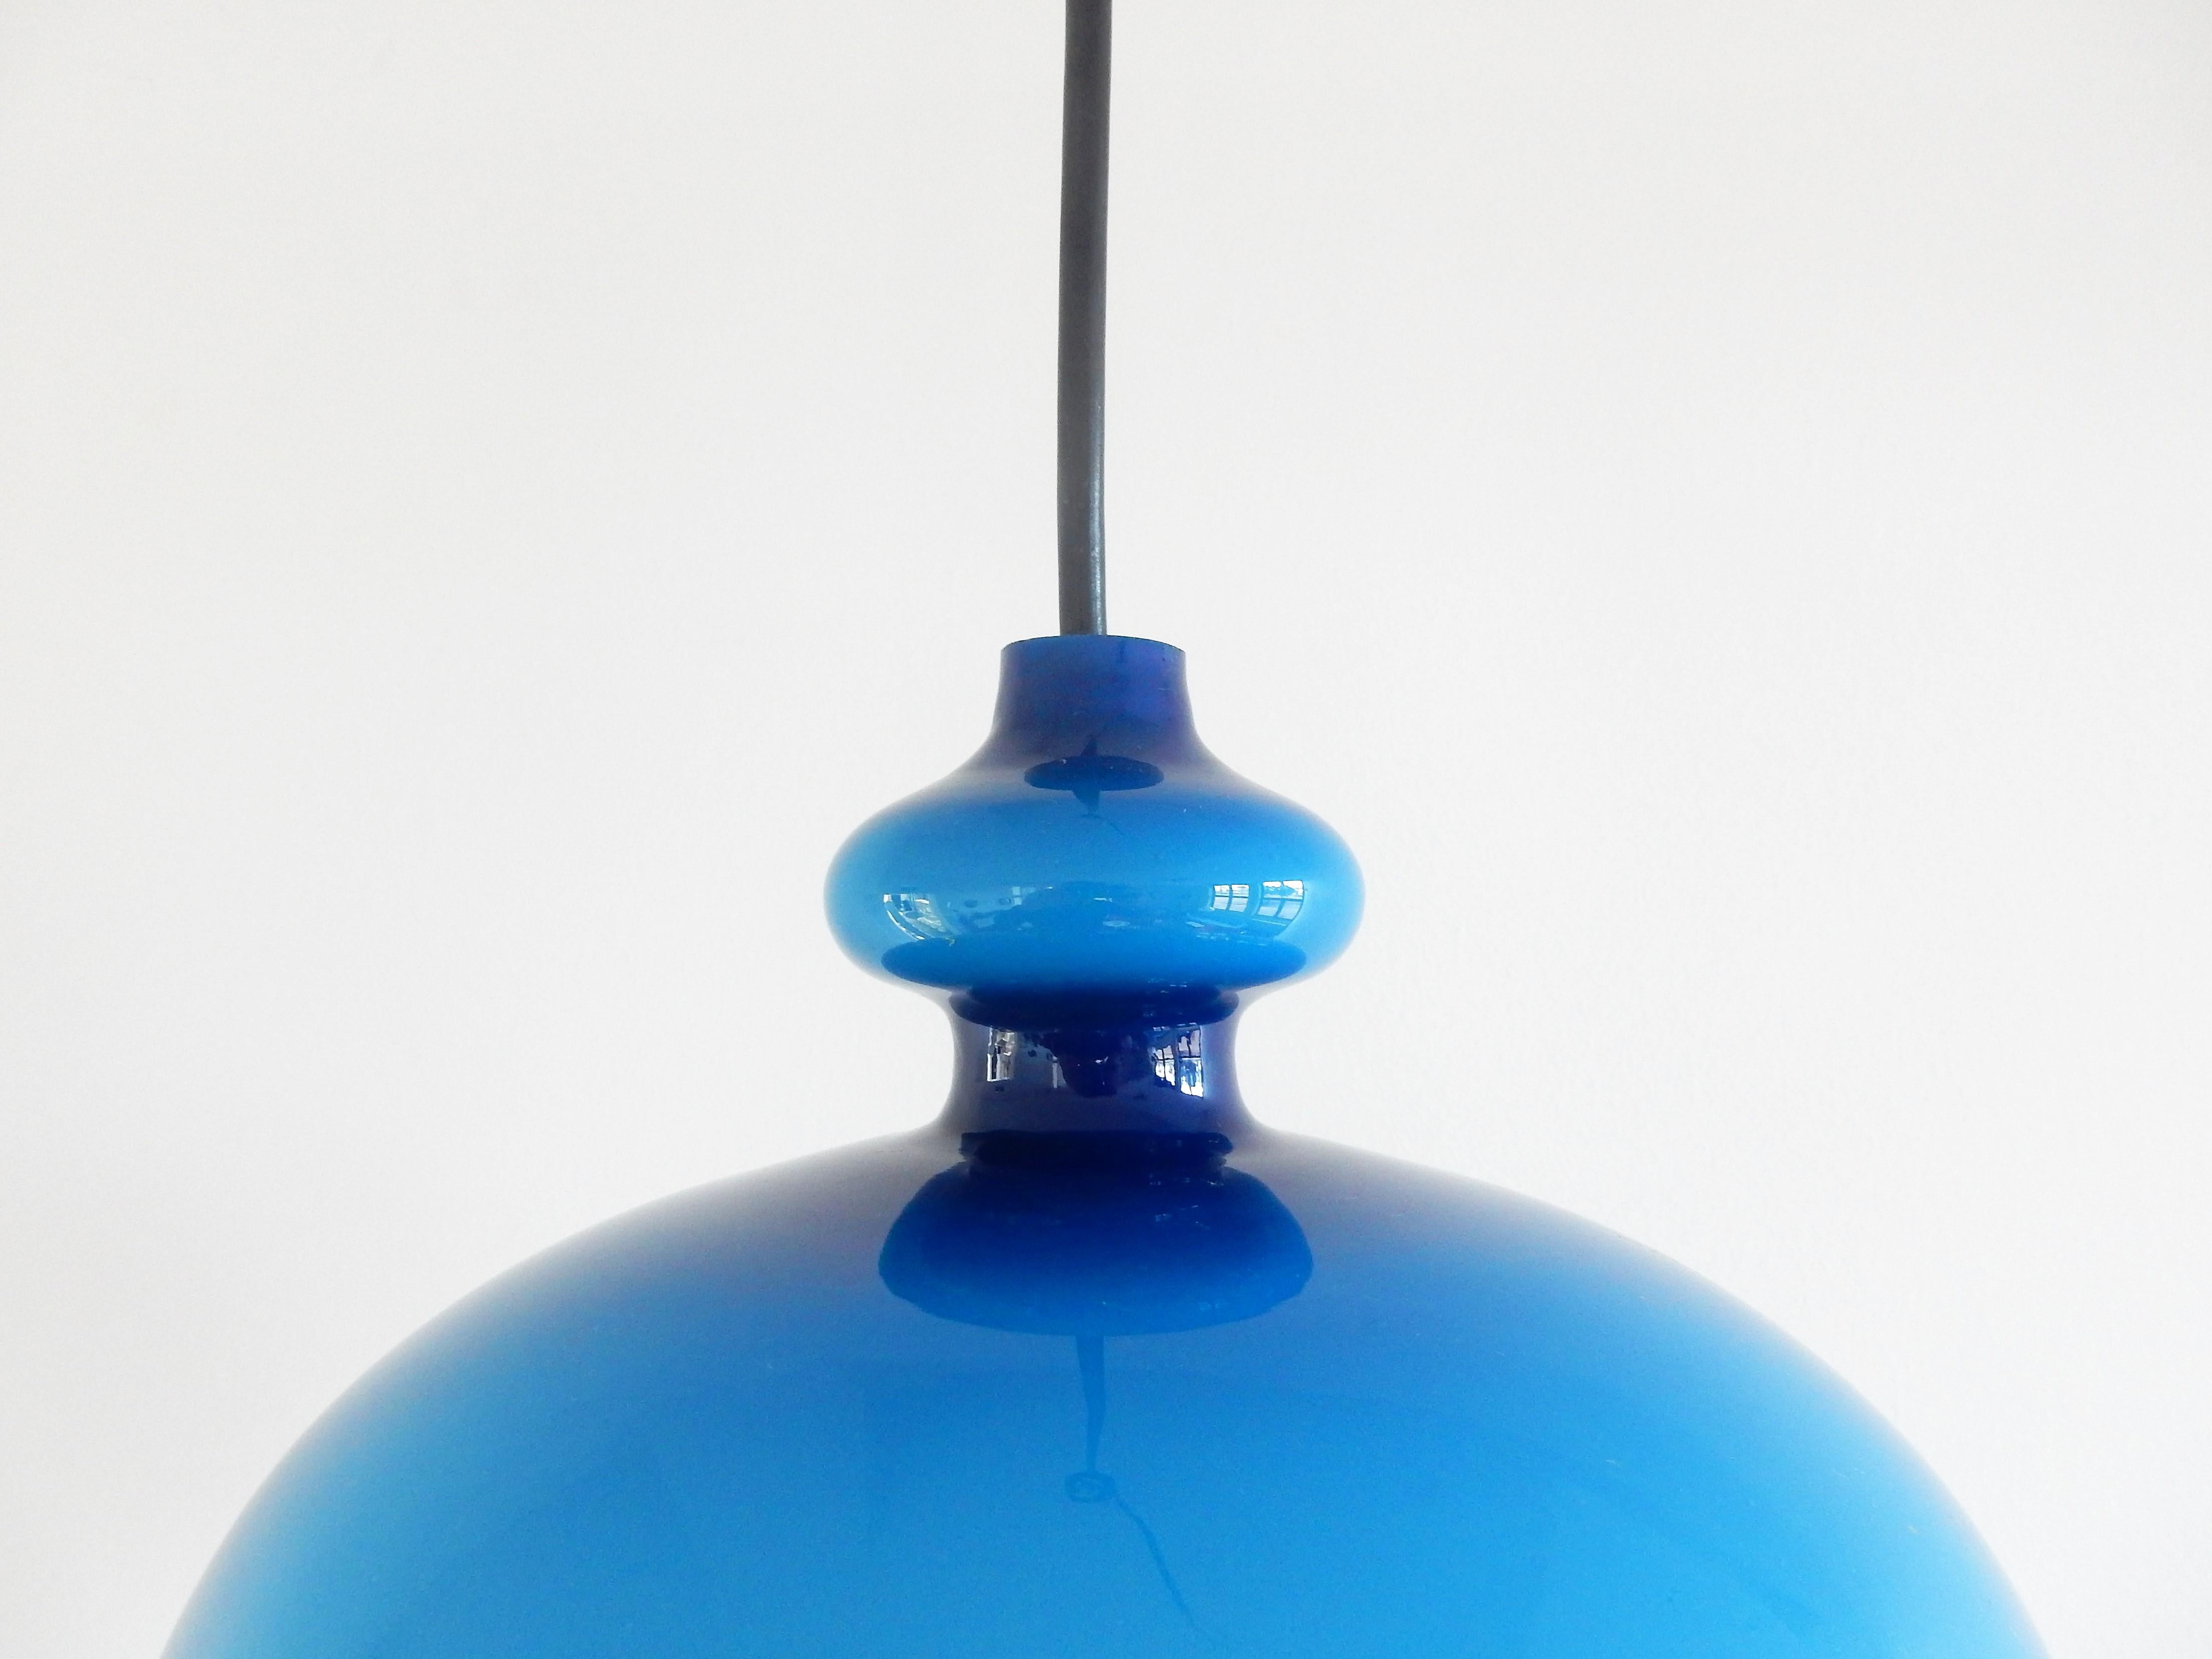 This beautiful round shaped glass pendant lamp was designed by Hans Agne Jakobsson for Svera in the 1960's. It has a bright blue colored glass shade with an opaline inside for a beautiful softened light. This lamp is in a good condition with a small